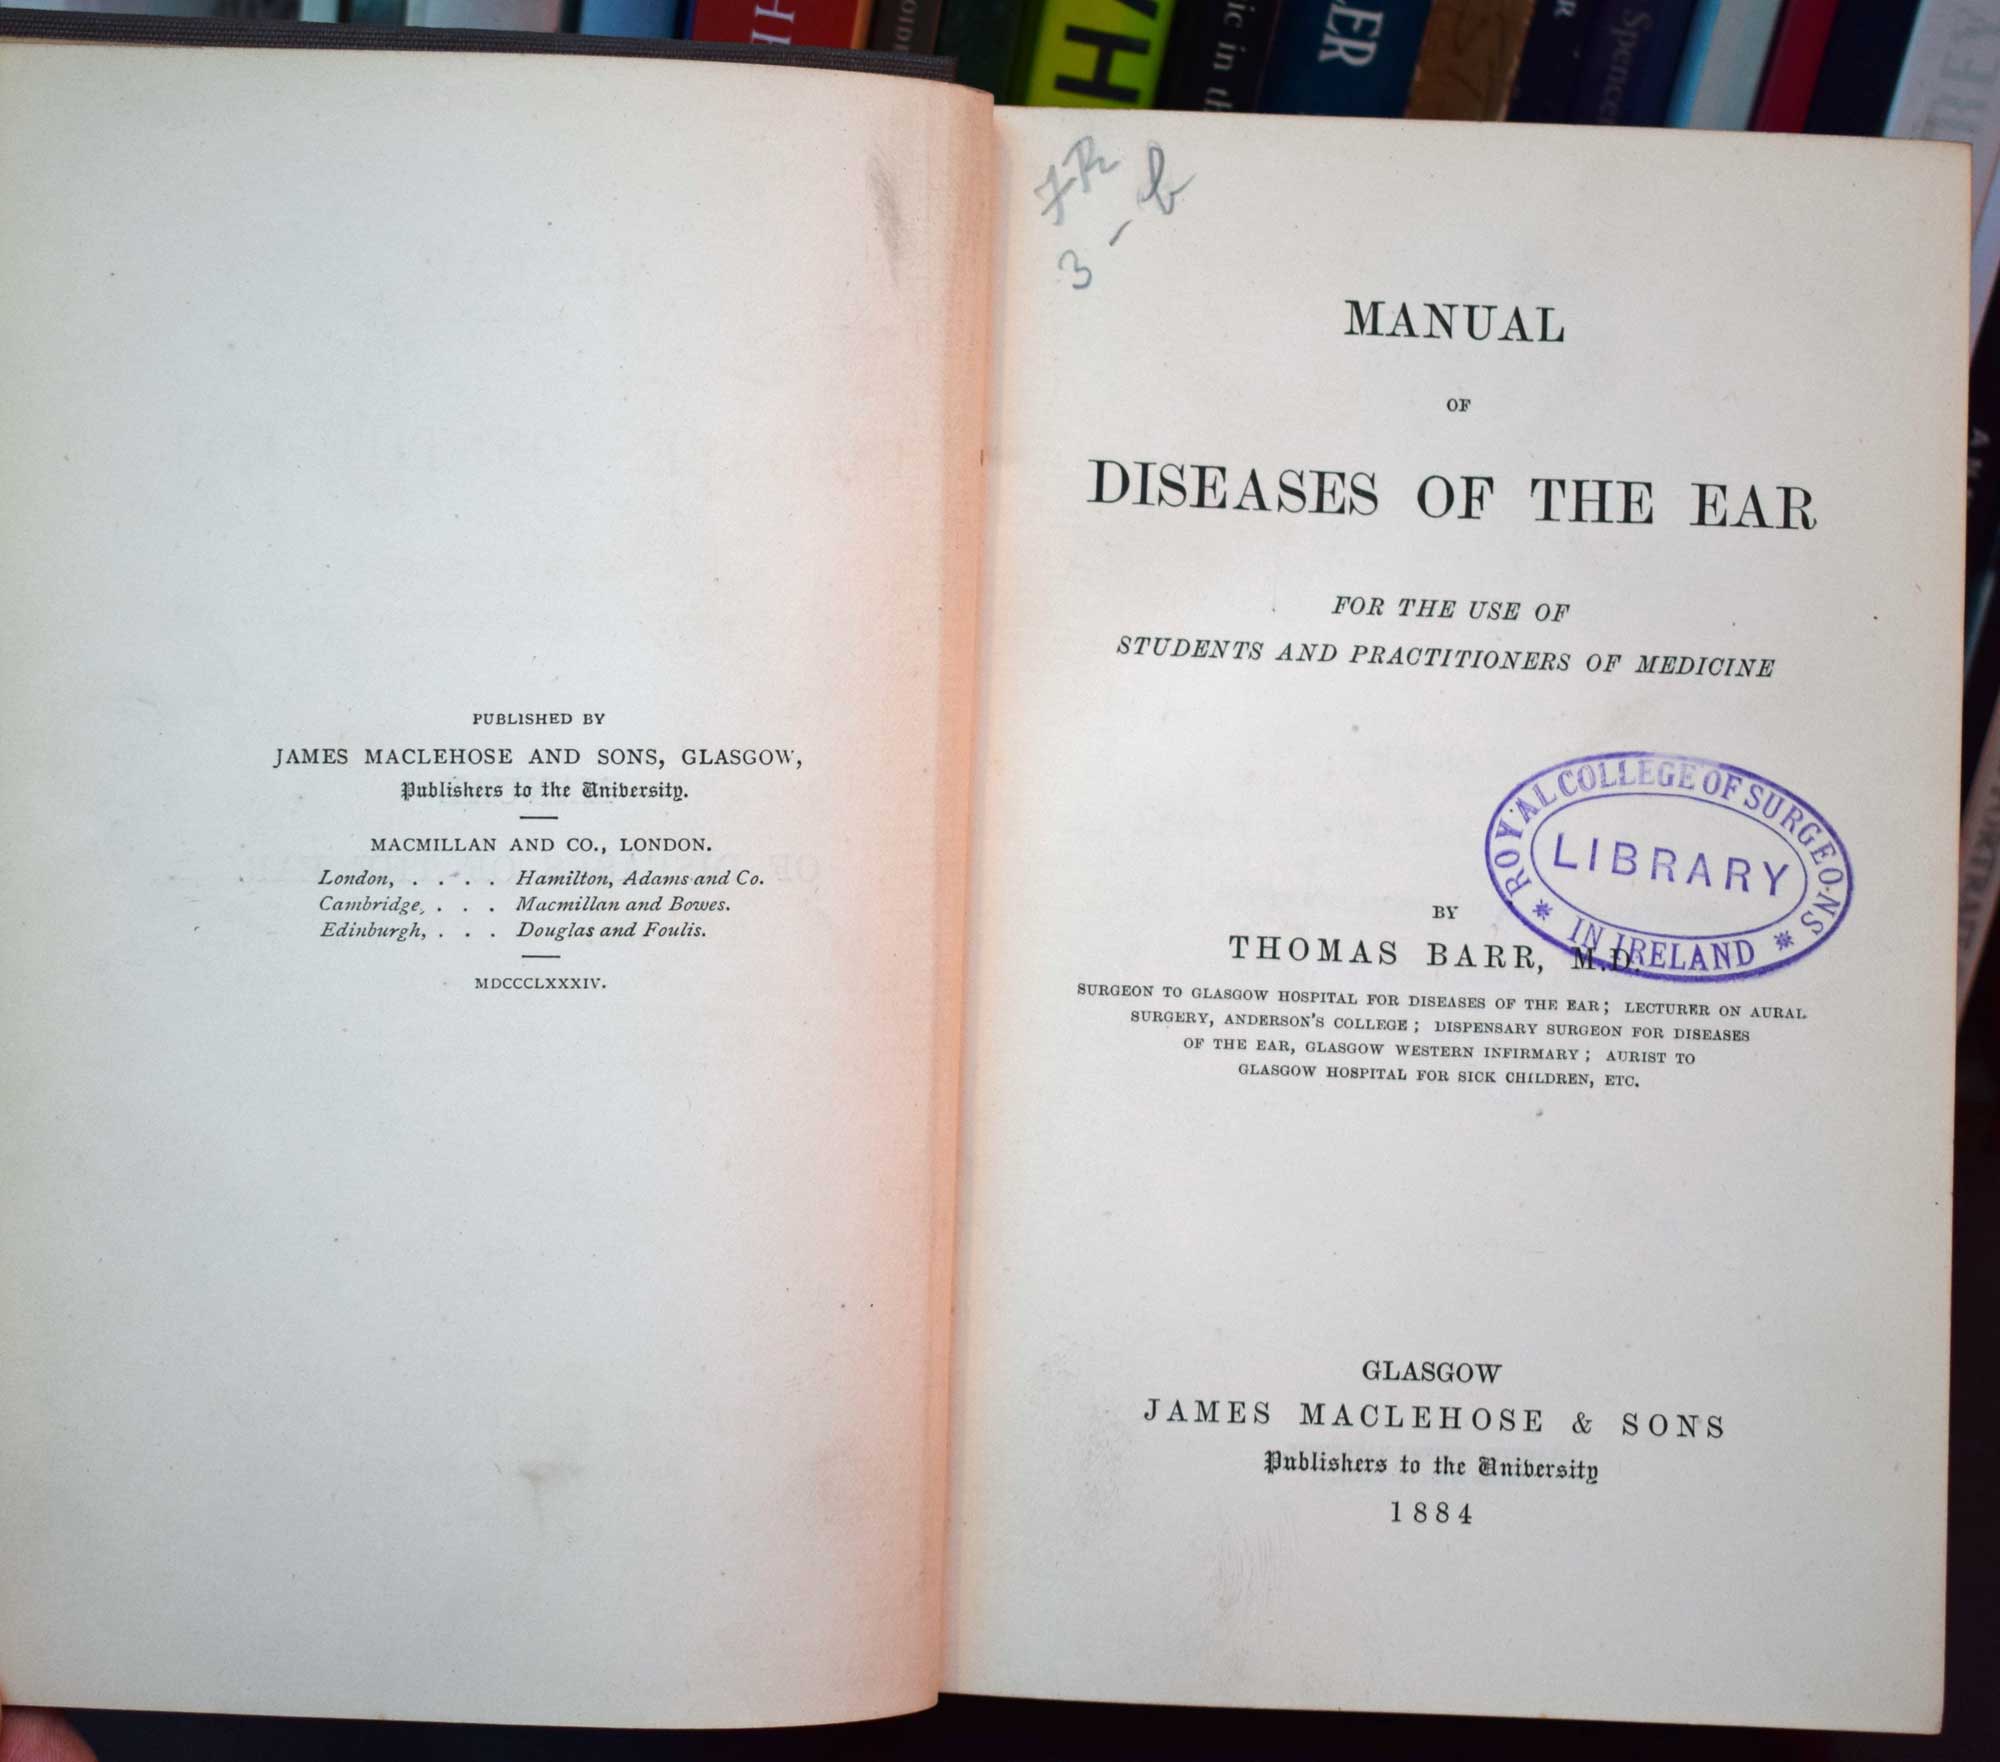 Manual of Disease of the Ear. For the Use of Students and Practitioners of Medicine.